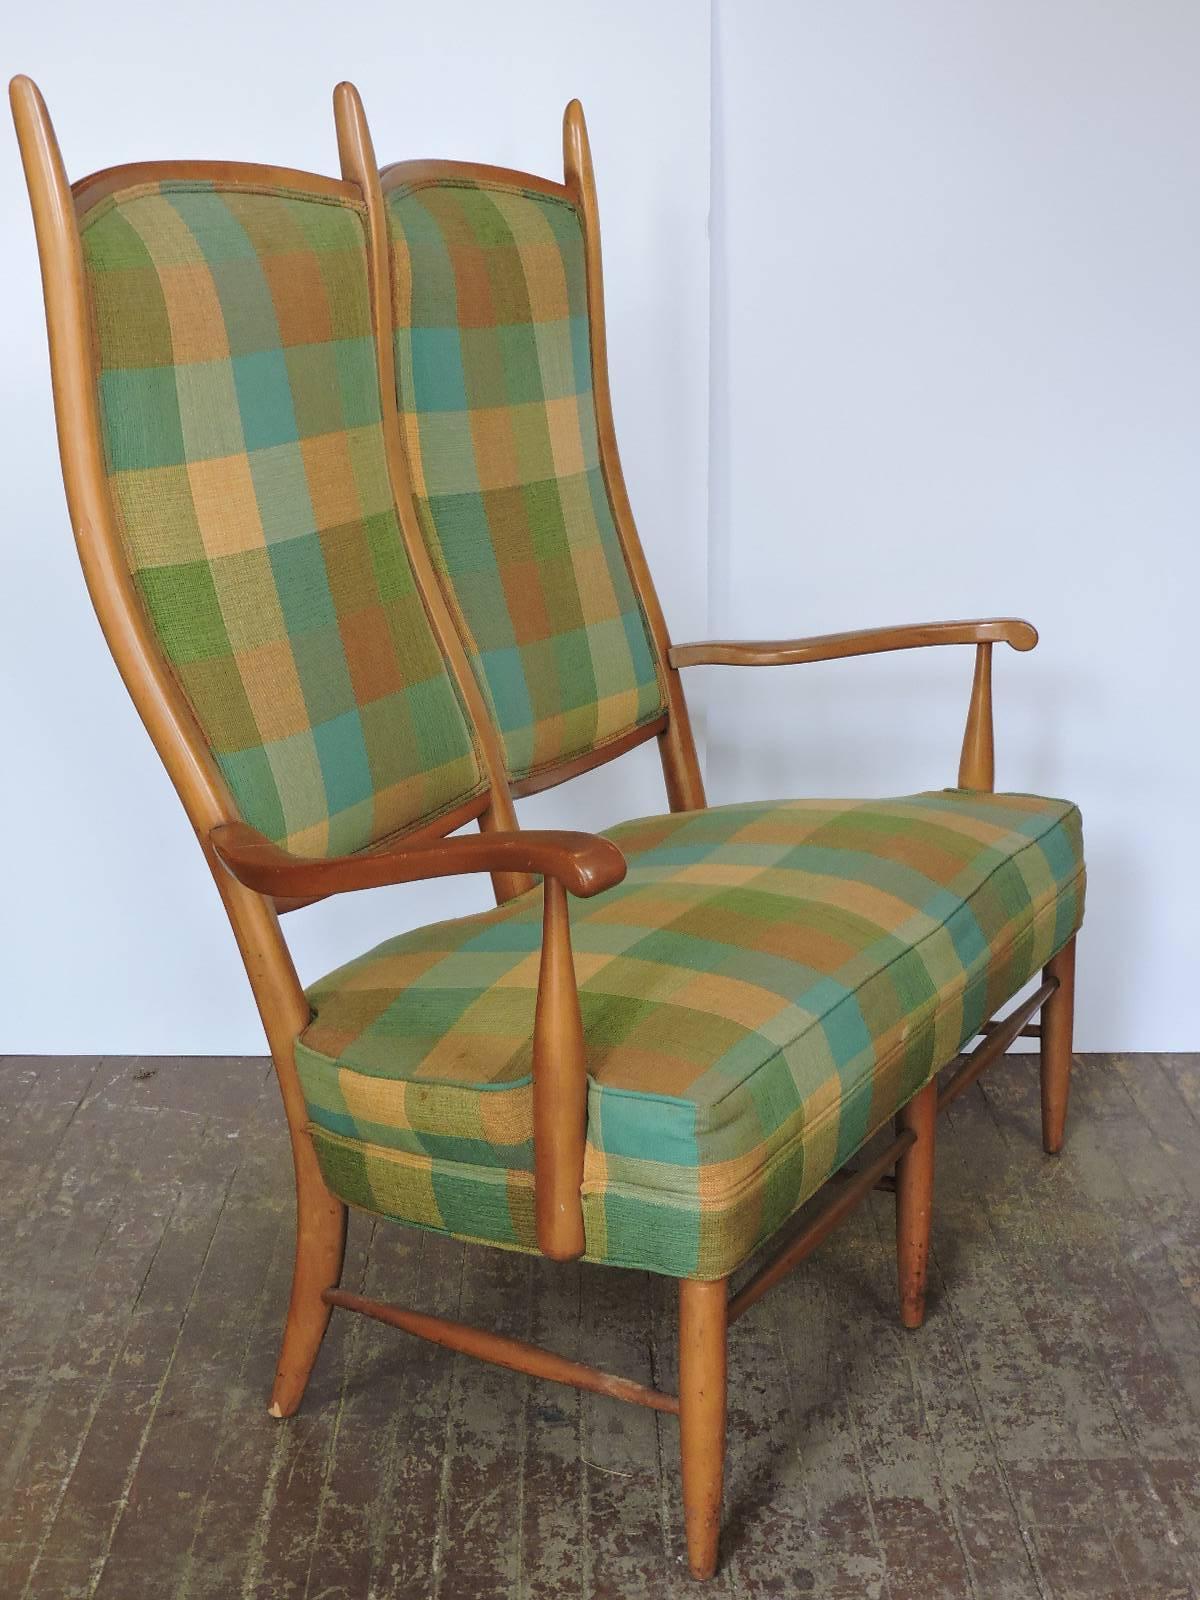 Attributed to Edward Wormley for Dunbar - a high peaked back maple framed two-arm settee loveseat in beautifully aged color patina to the wood and the original plaid upholstery, circa 1950-1960. No label present.